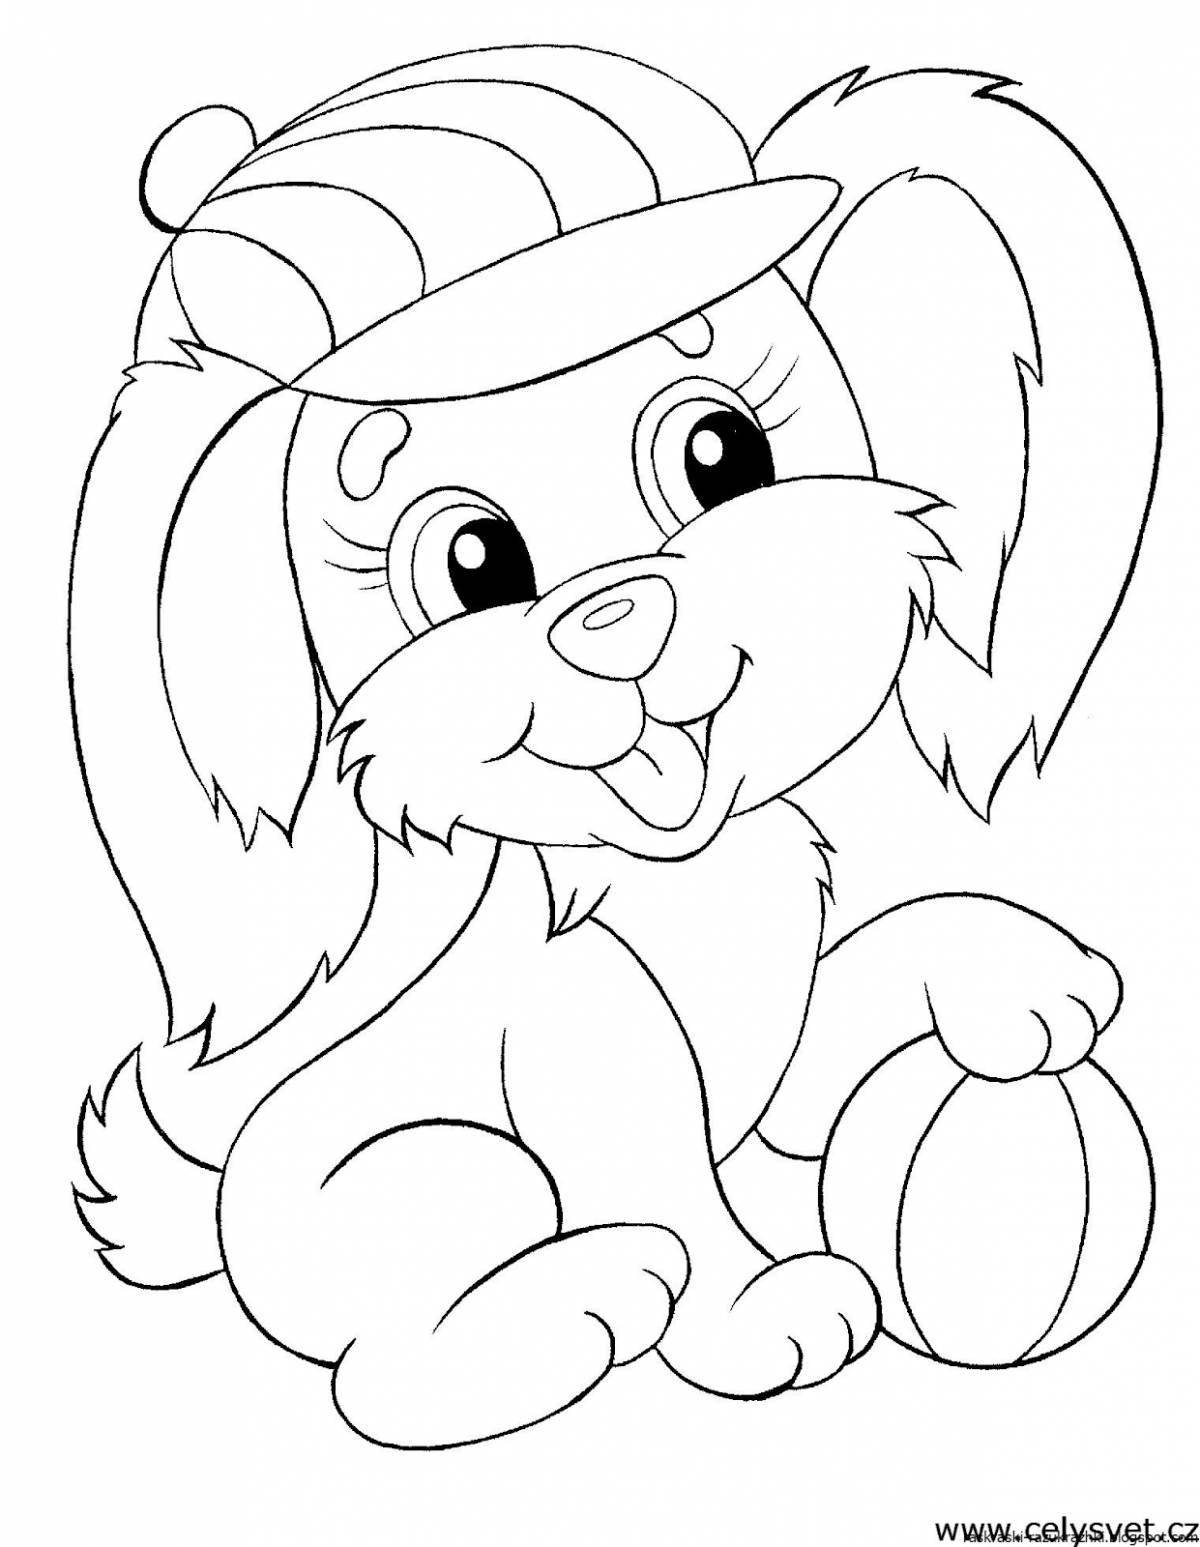 Coloring book for kids #5